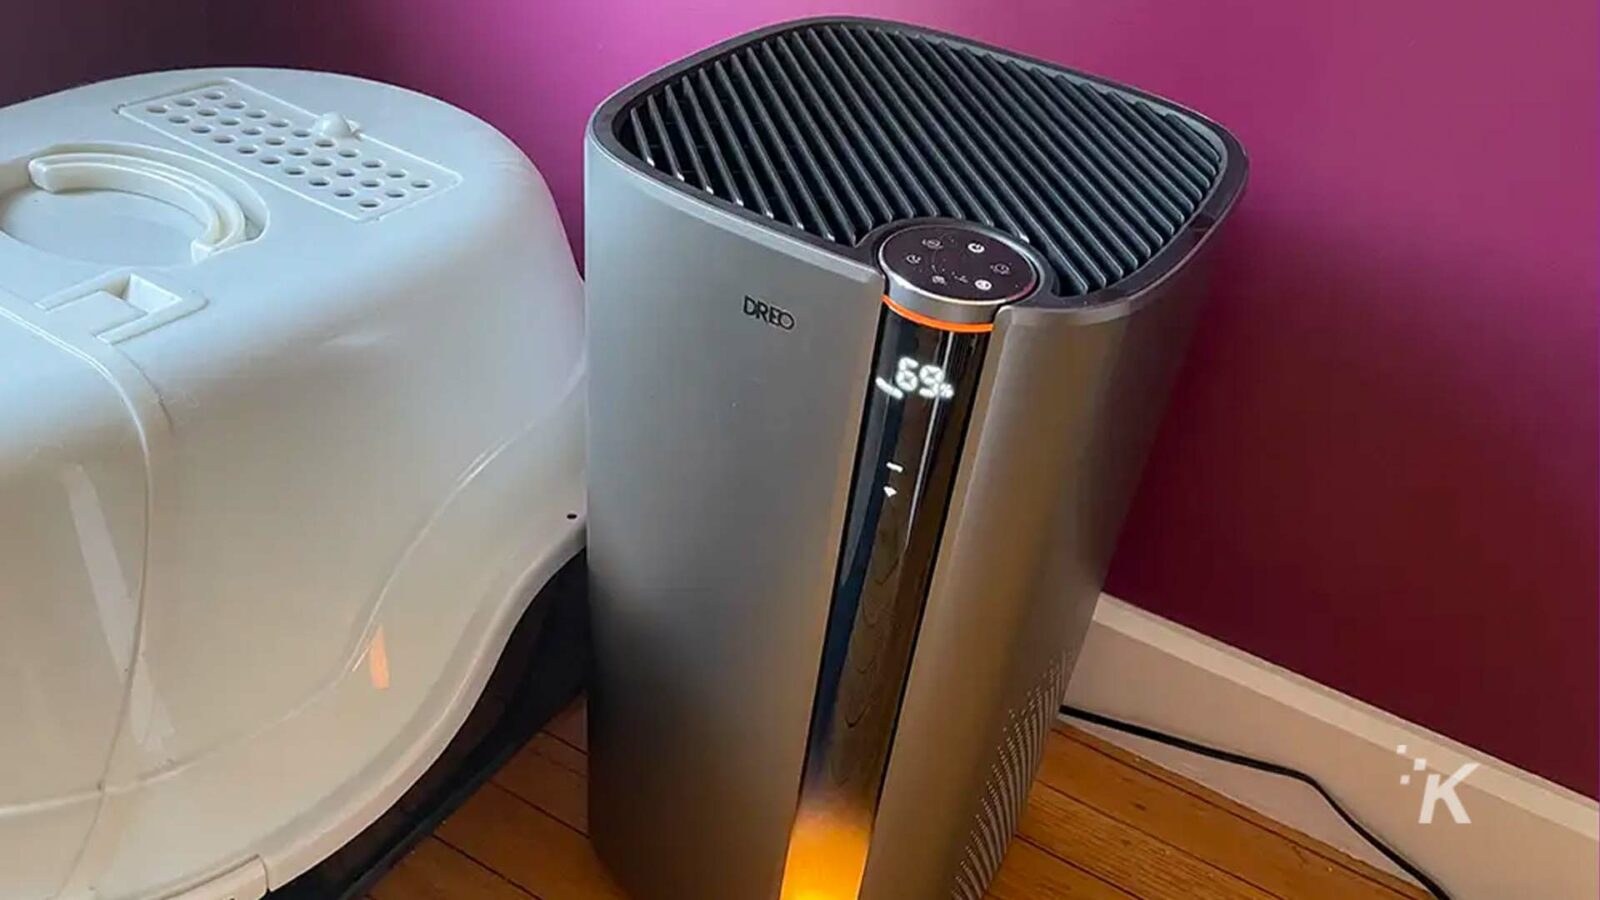 A modern home appliance stands in the middle of an indoor room, emitting a soft glow.